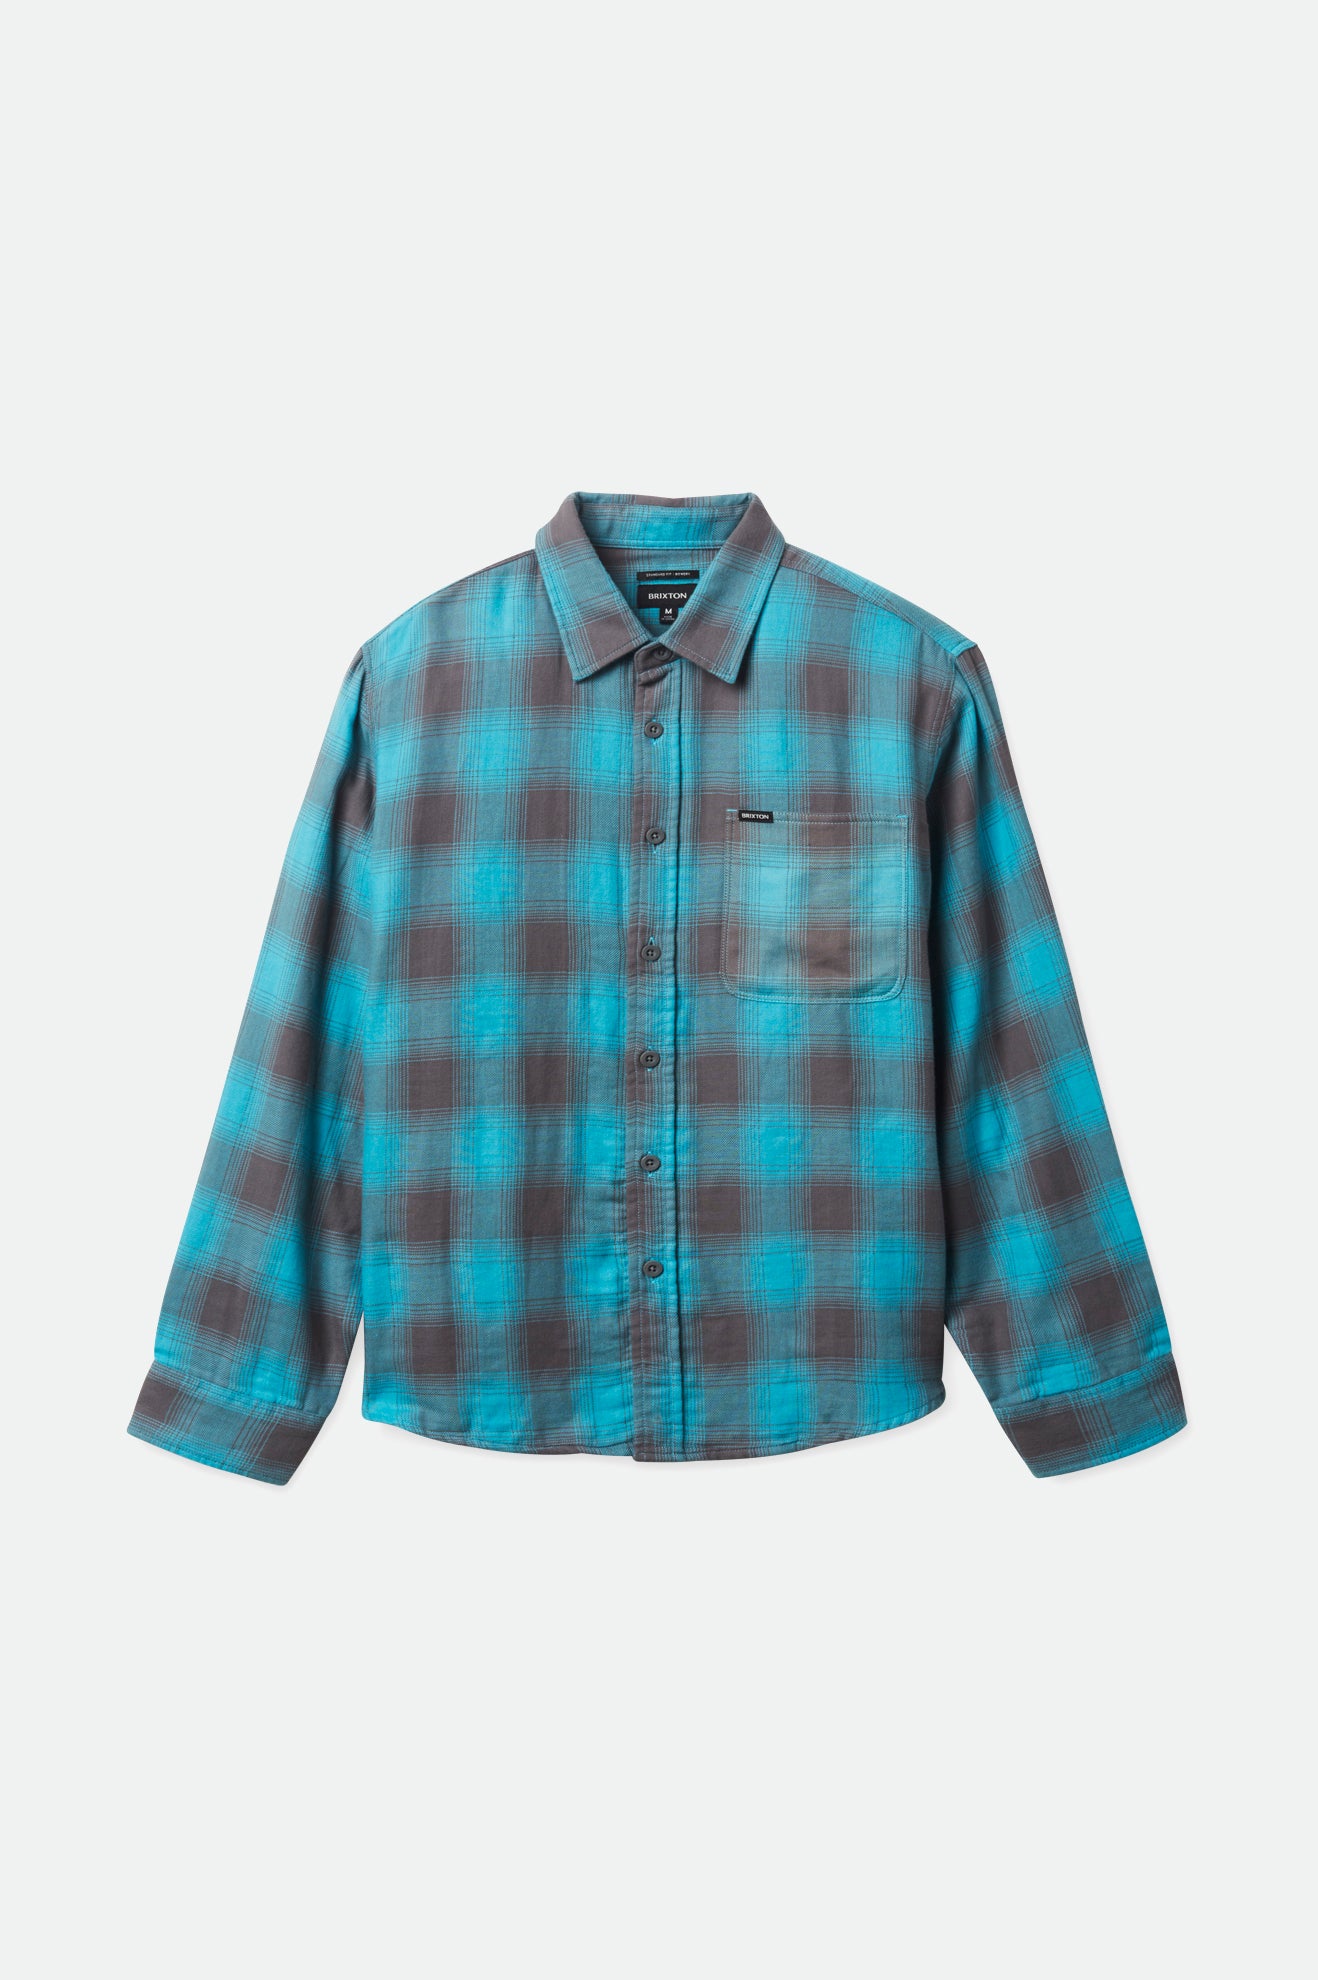 Bowery Soft Weave L/S Woven - Teal/Pebble